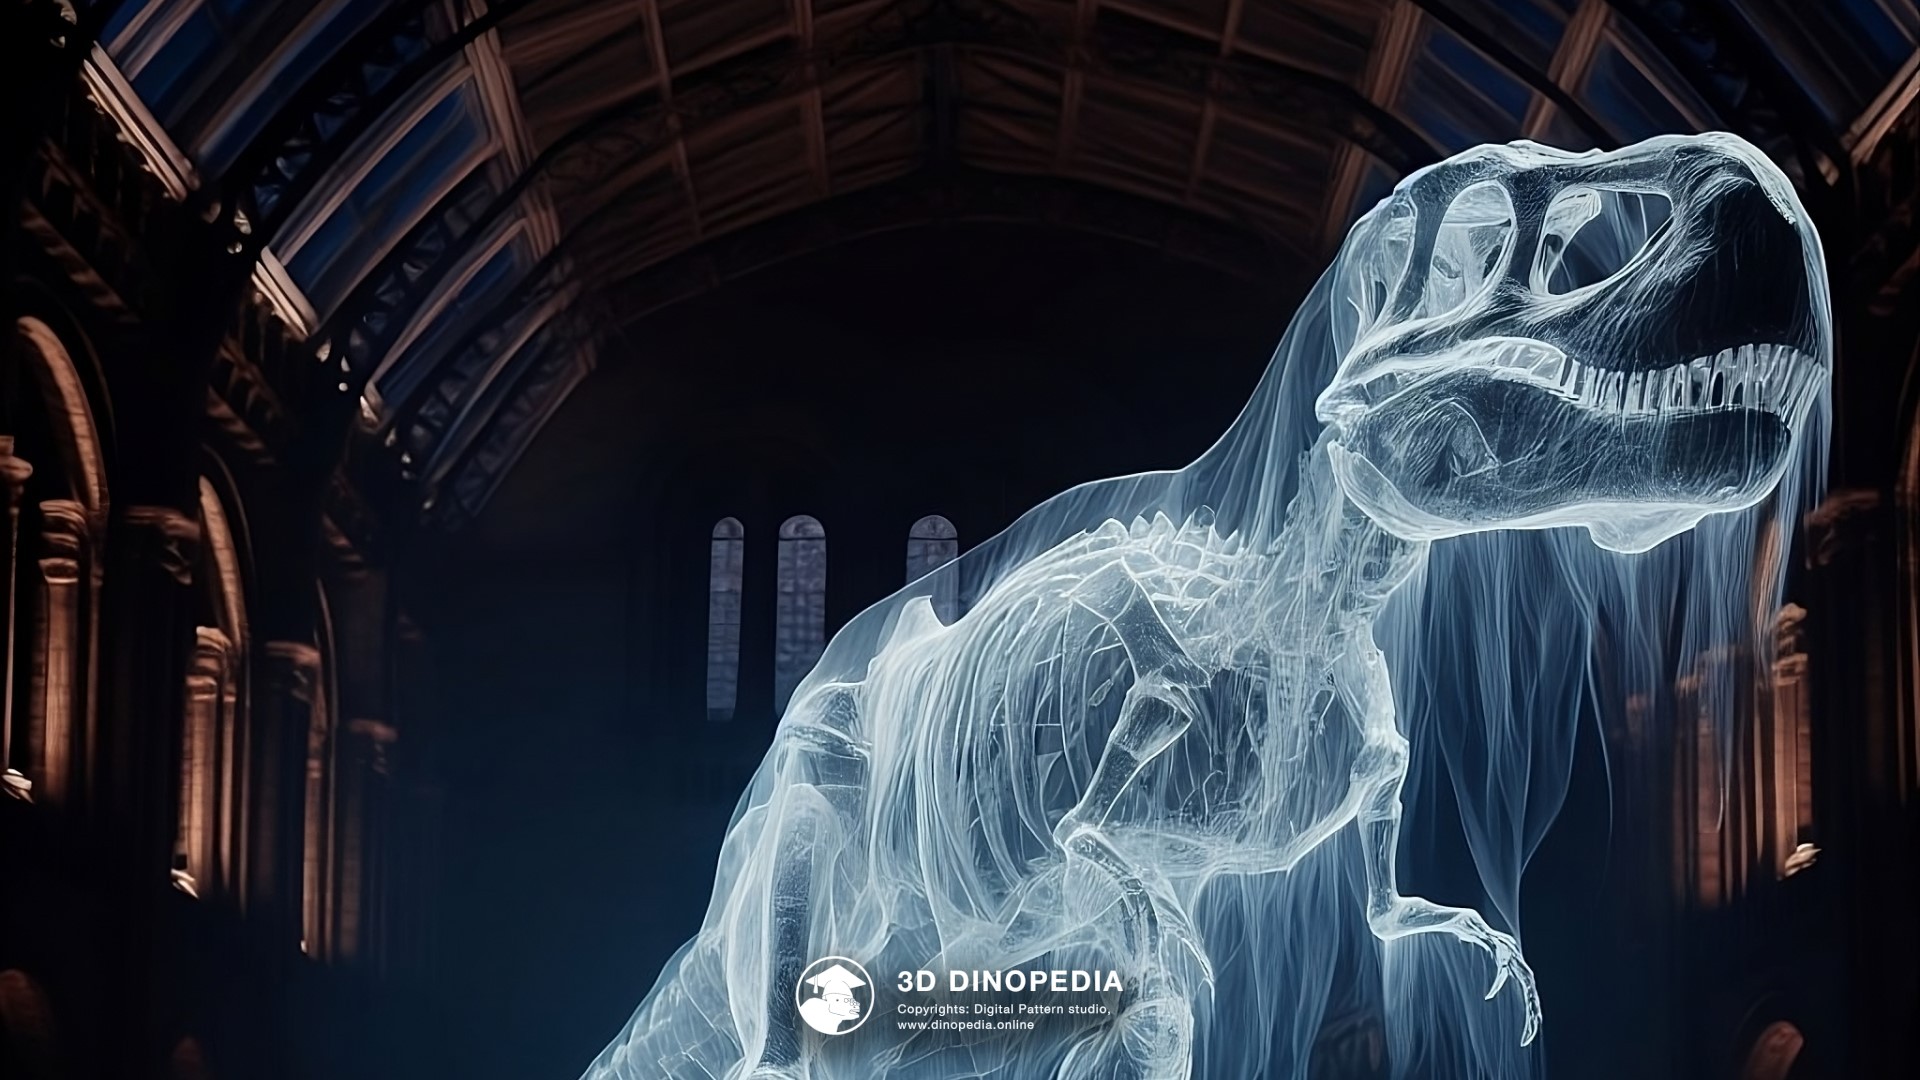 3D Dinopedia Halloween: Horror and Mystery in 3D Dinopedia